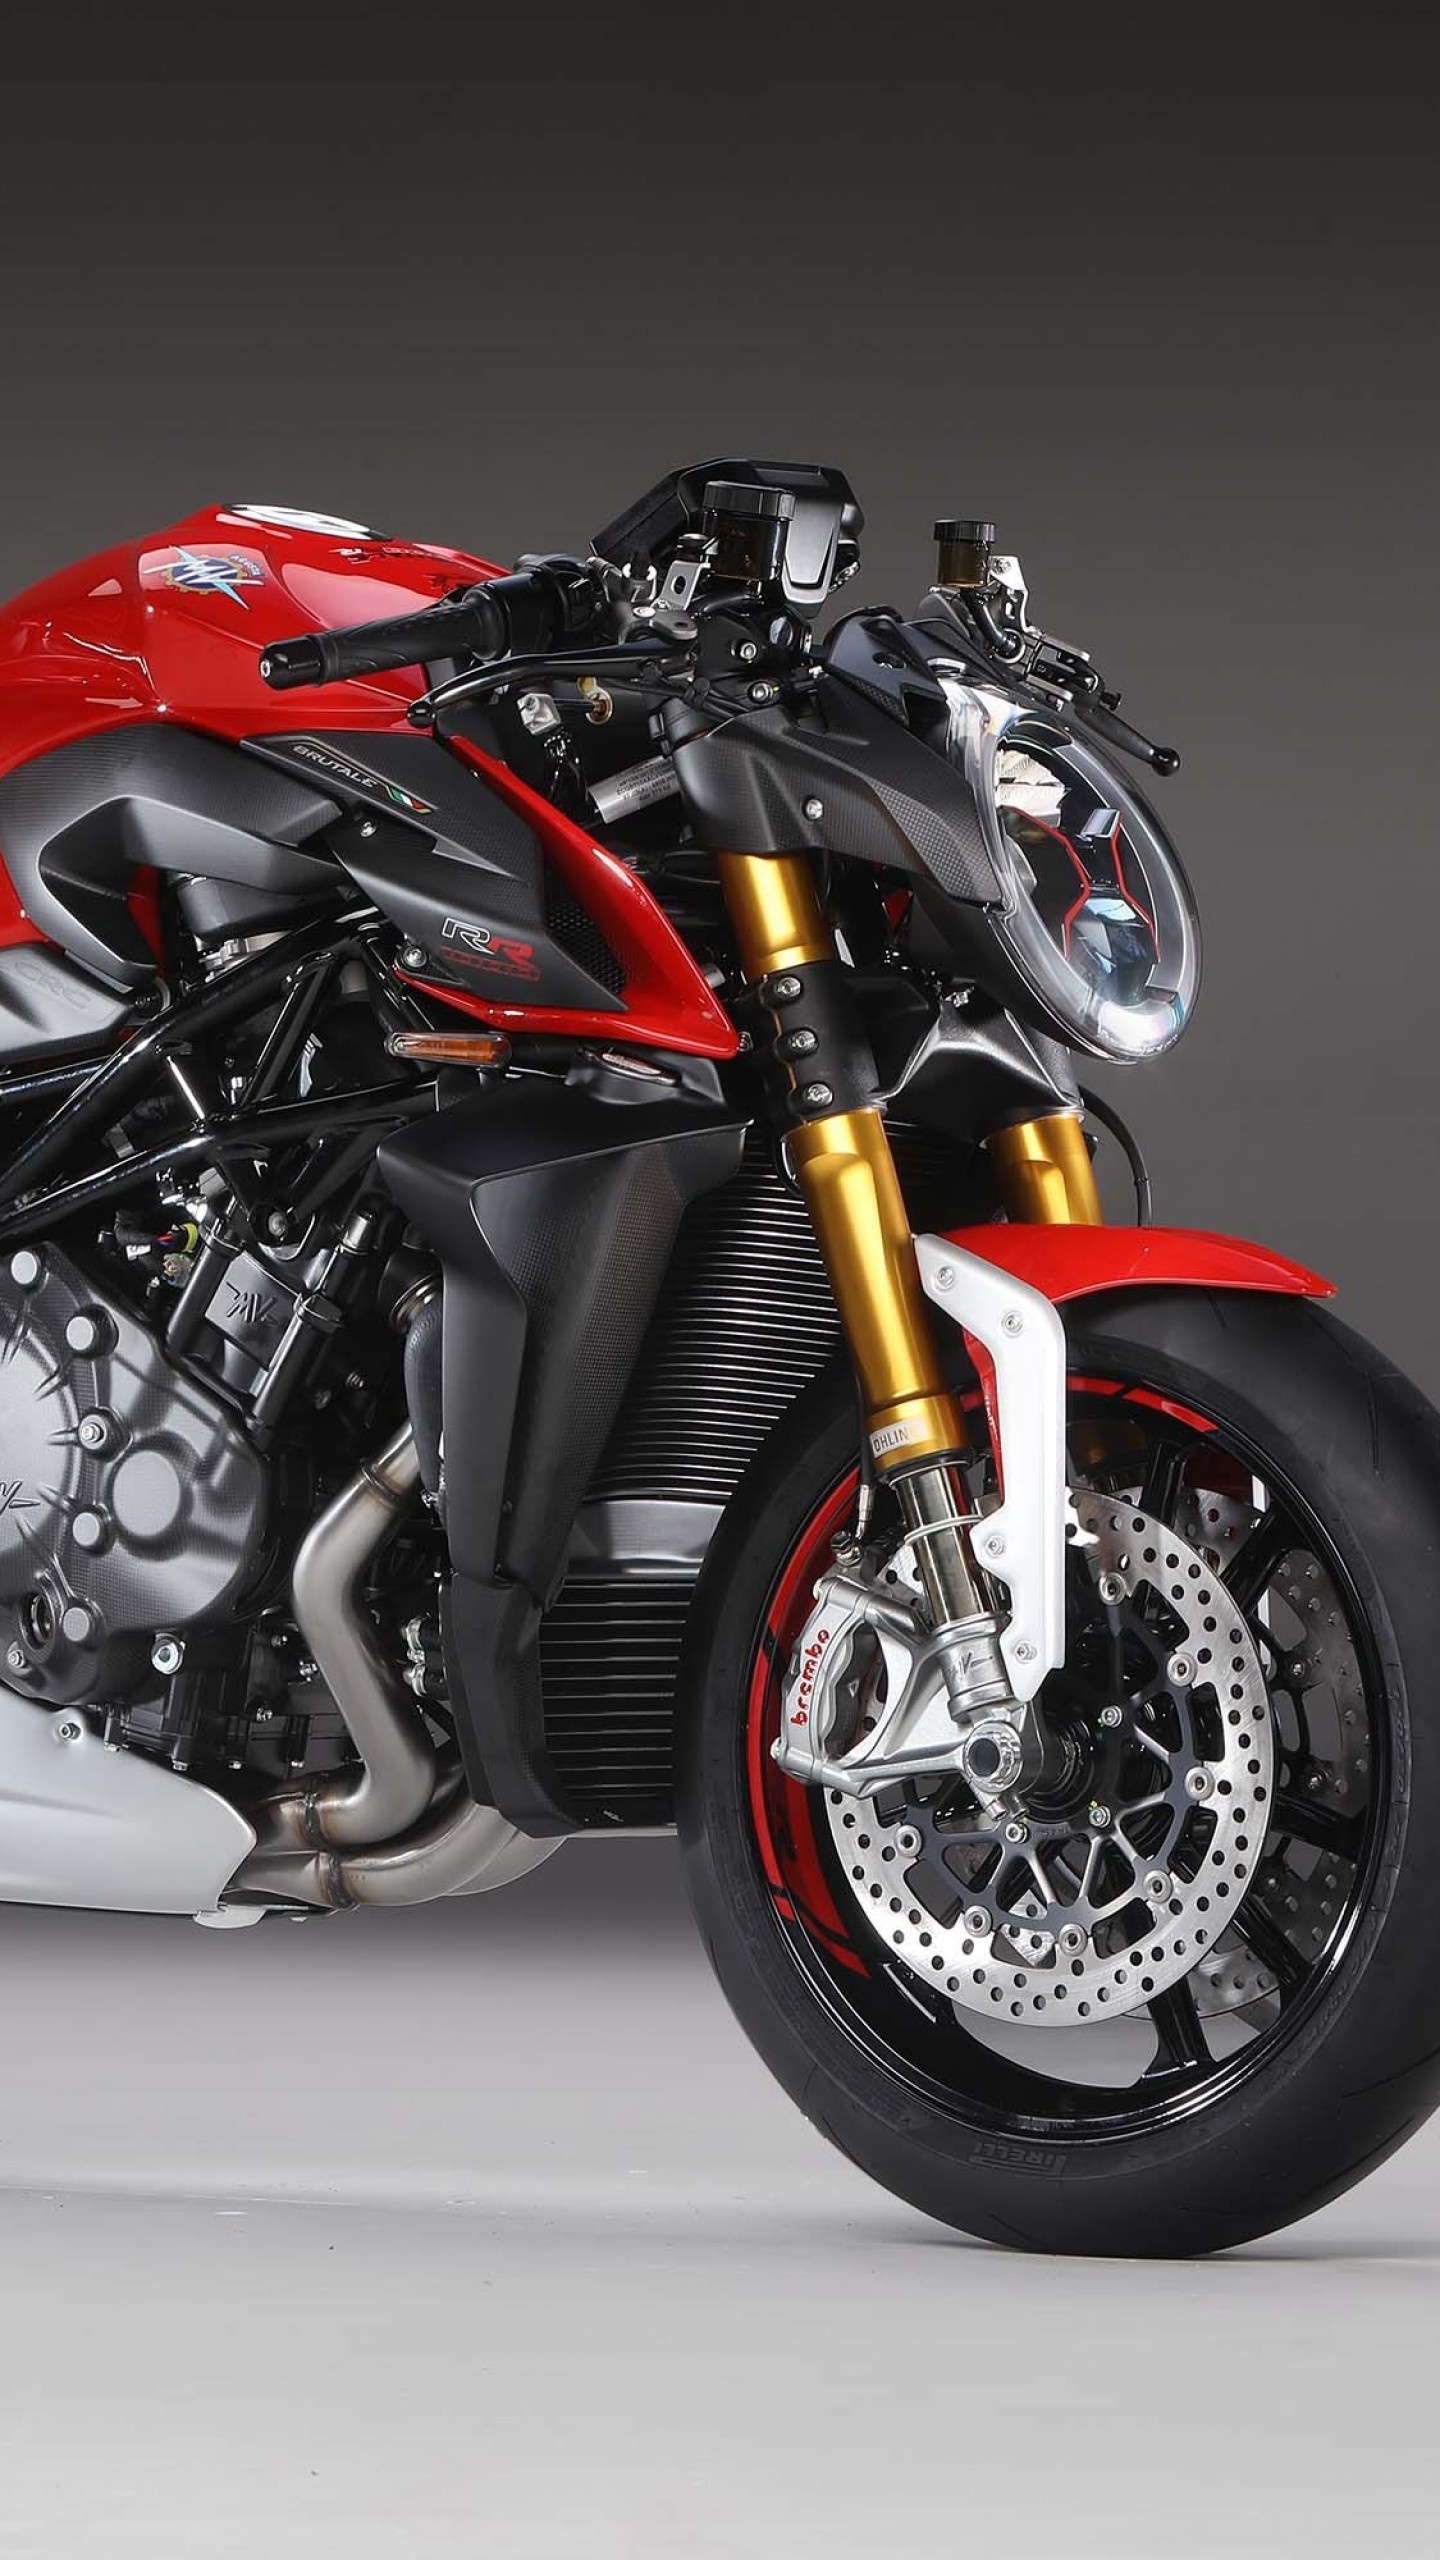 MV Agusta Brutale RR, 2020 model, Captivating wallpapers, Unmatched riding pleasure, 1440x2560 HD Phone